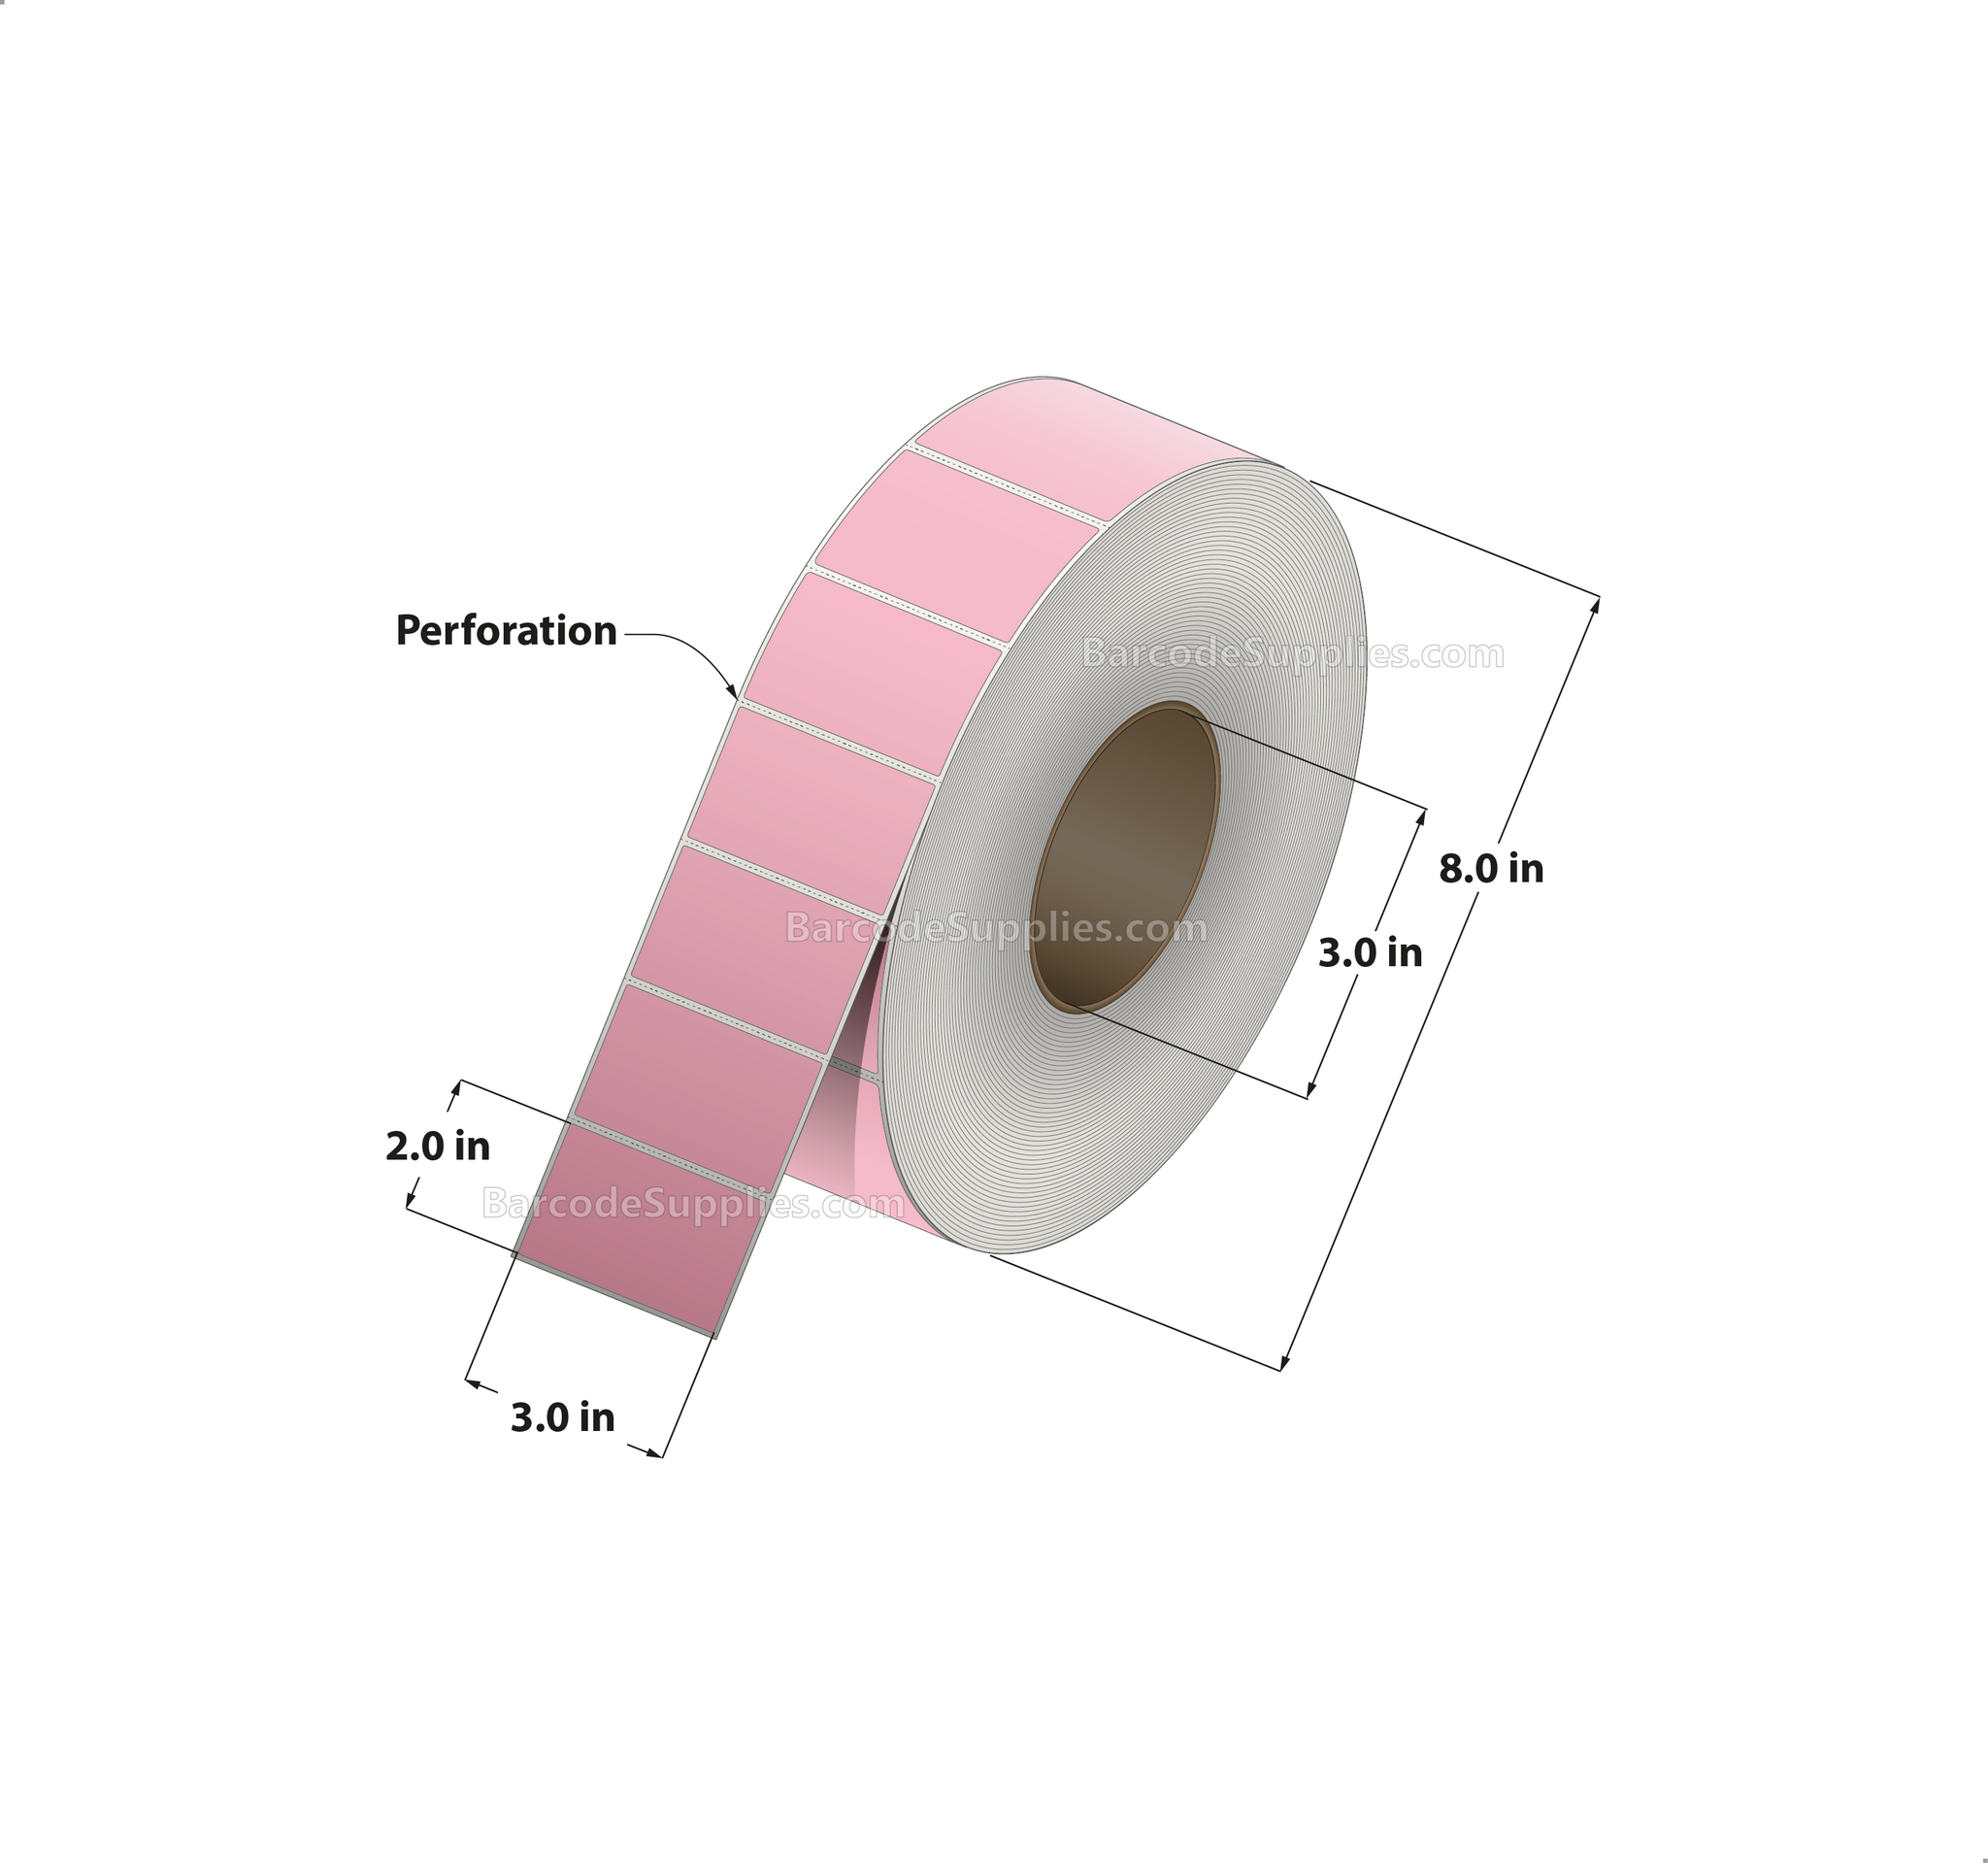 3 x 2 Thermal Transfer 176 Pink Labels With Permanent Adhesive - Perforated - 2900 Labels Per Roll - Carton Of 8 Rolls - 23200 Labels Total - MPN: RFC-3-2-2900-PK